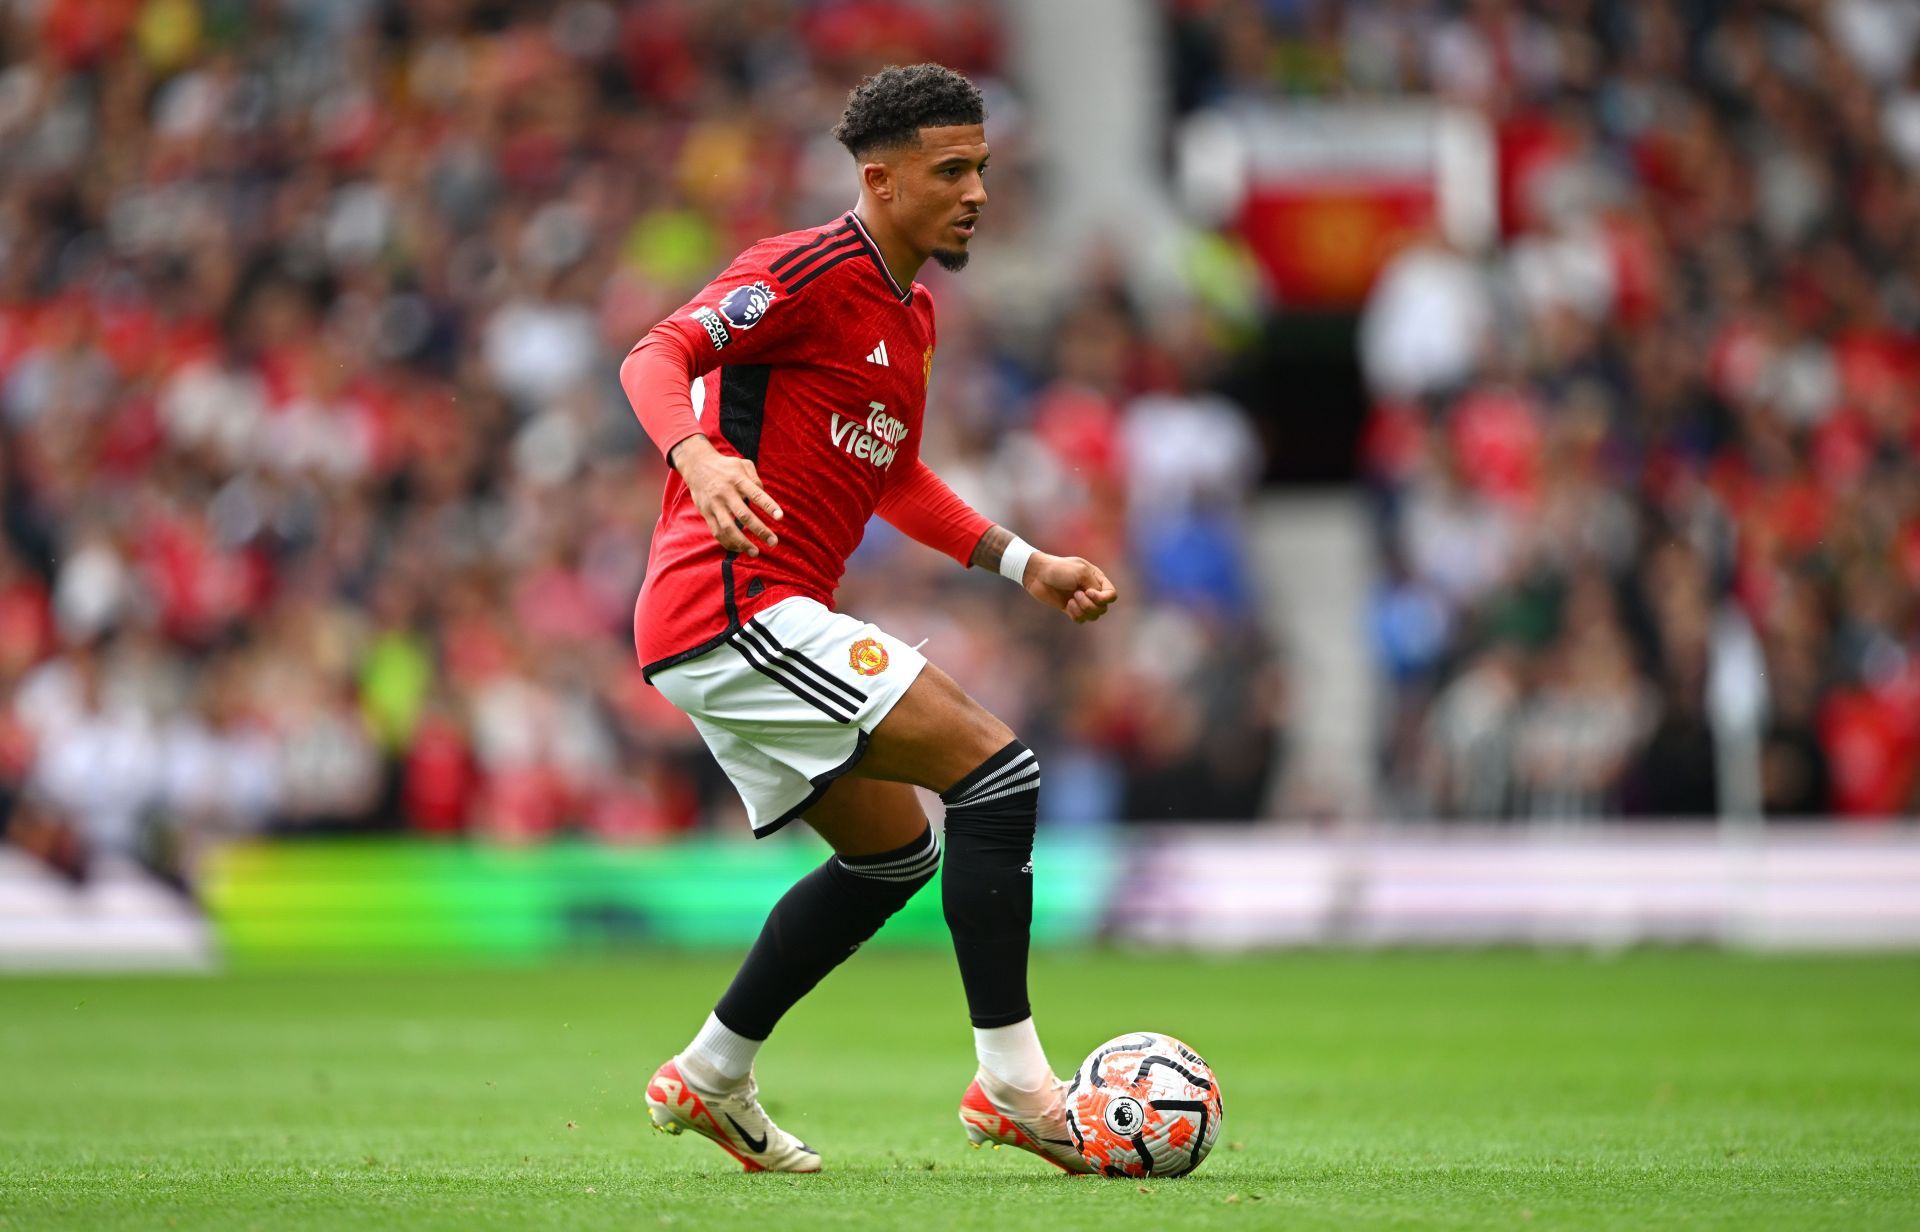 Jadon Sancho is playing with fire at Old Trafford